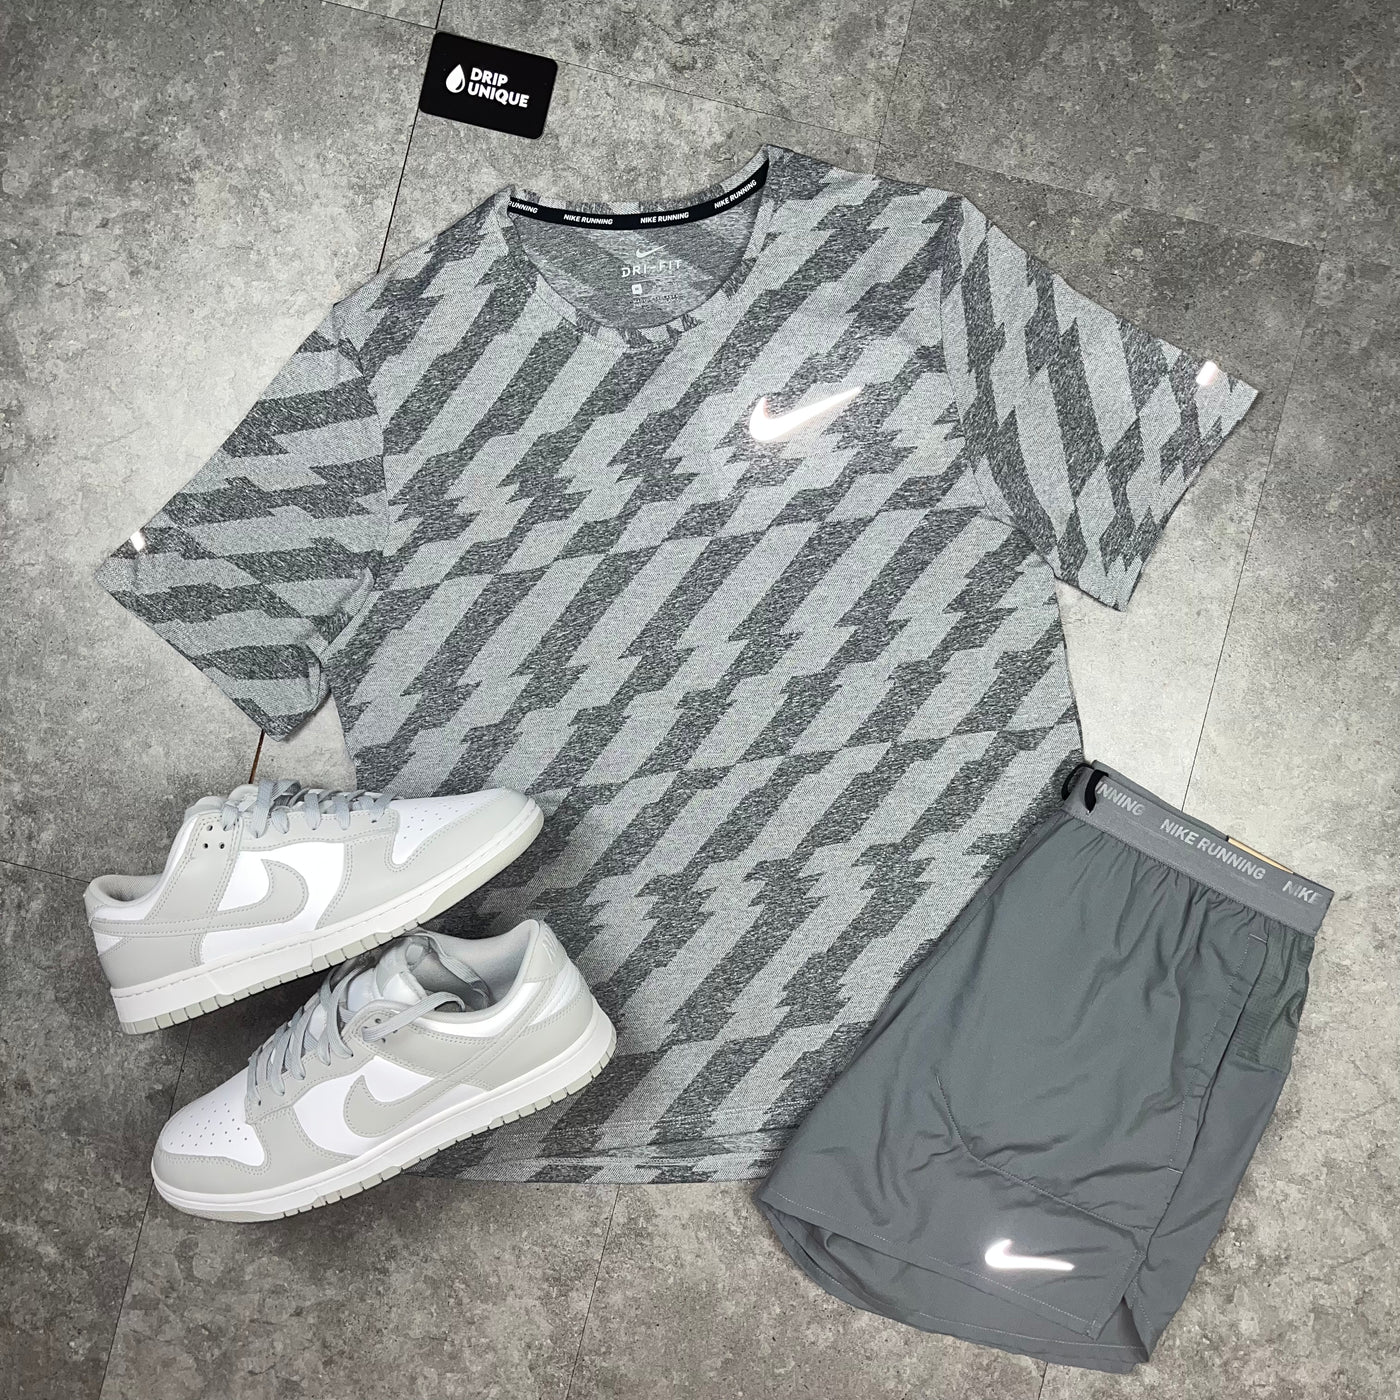 Men's Jacquard Nike Miler T-Shirt Grey & Grey Flex Stride Shorts Set, paired with the nike dunk low grey fog trainers, dripuniqueuk